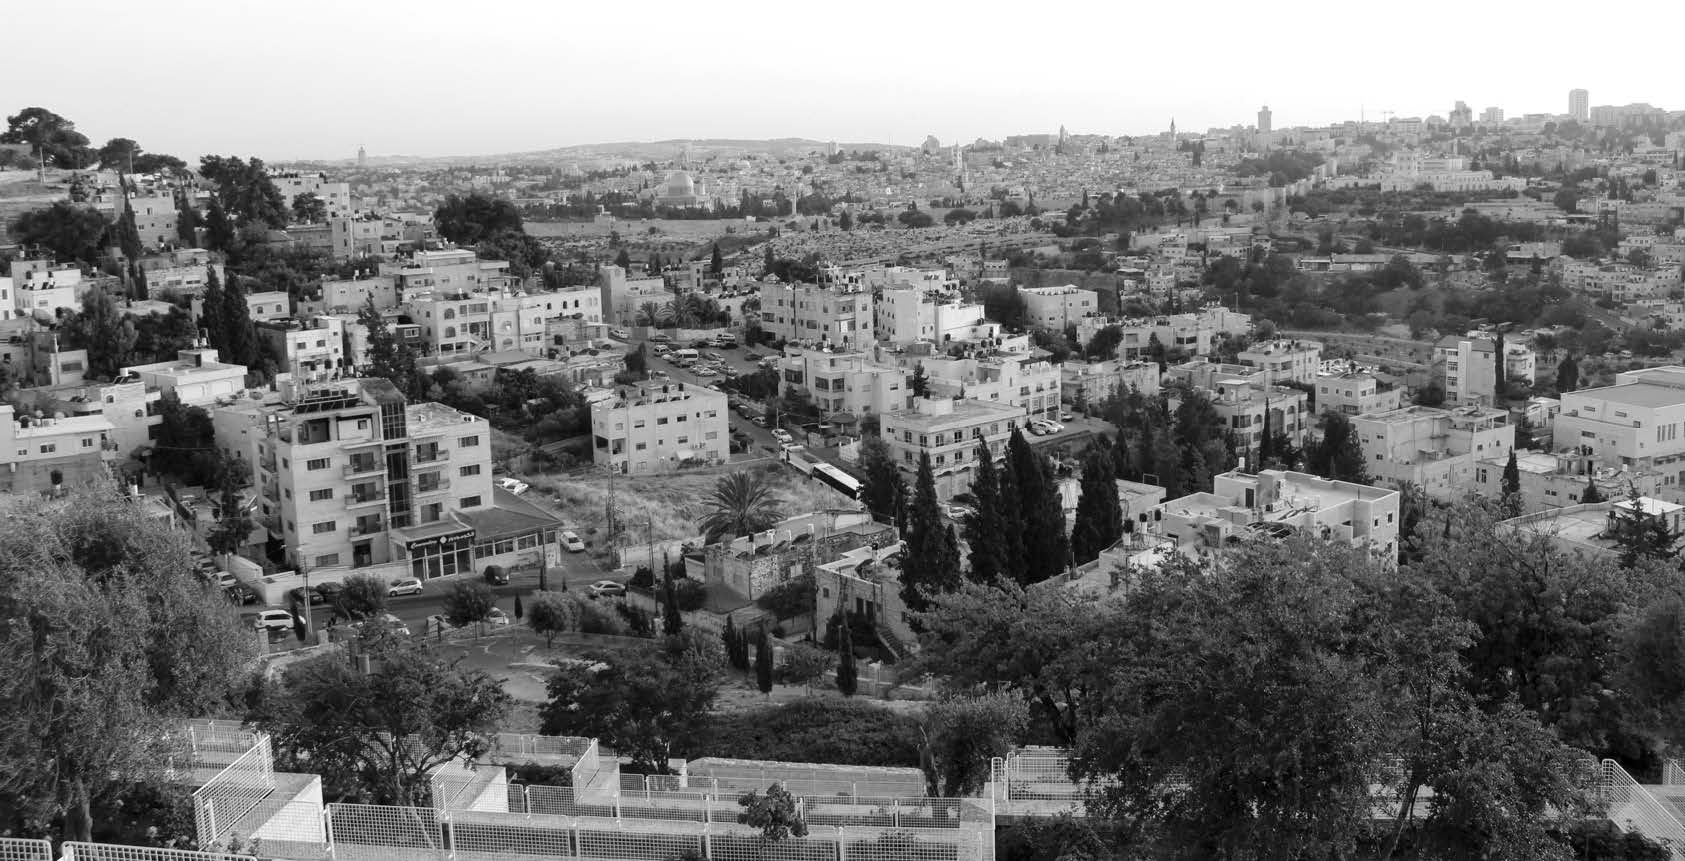 Figure 4. View of the Dome of the Rock from Mt. Scopus.